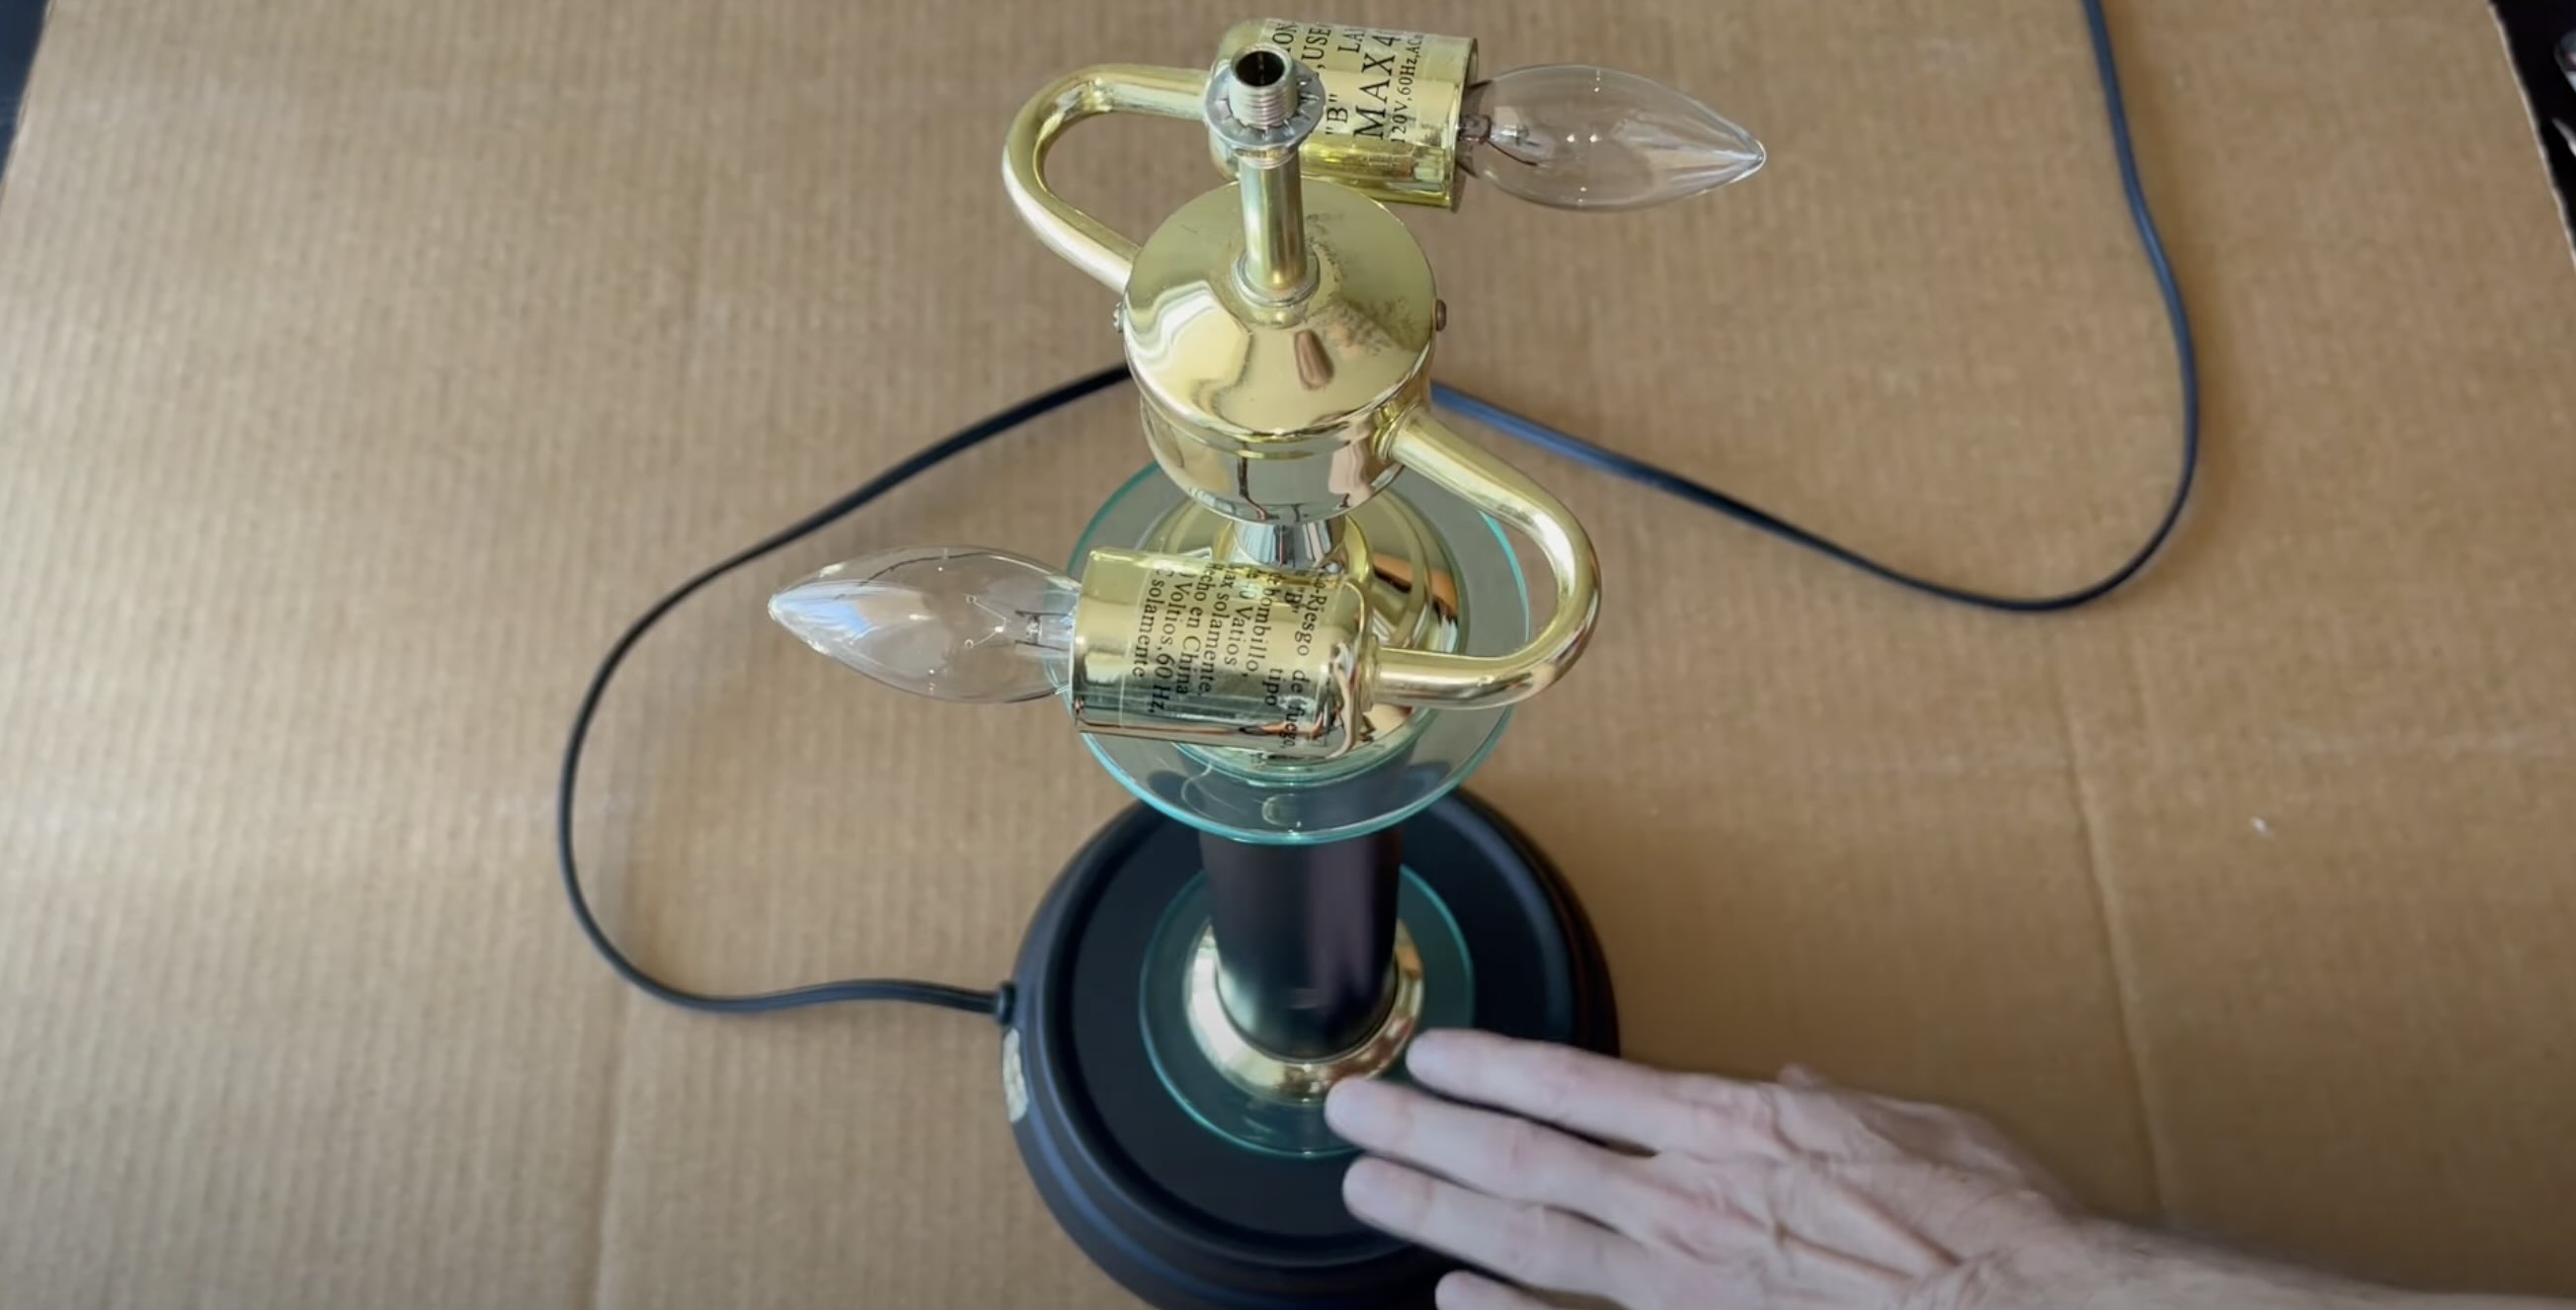 How To Fix A Touch Lamp